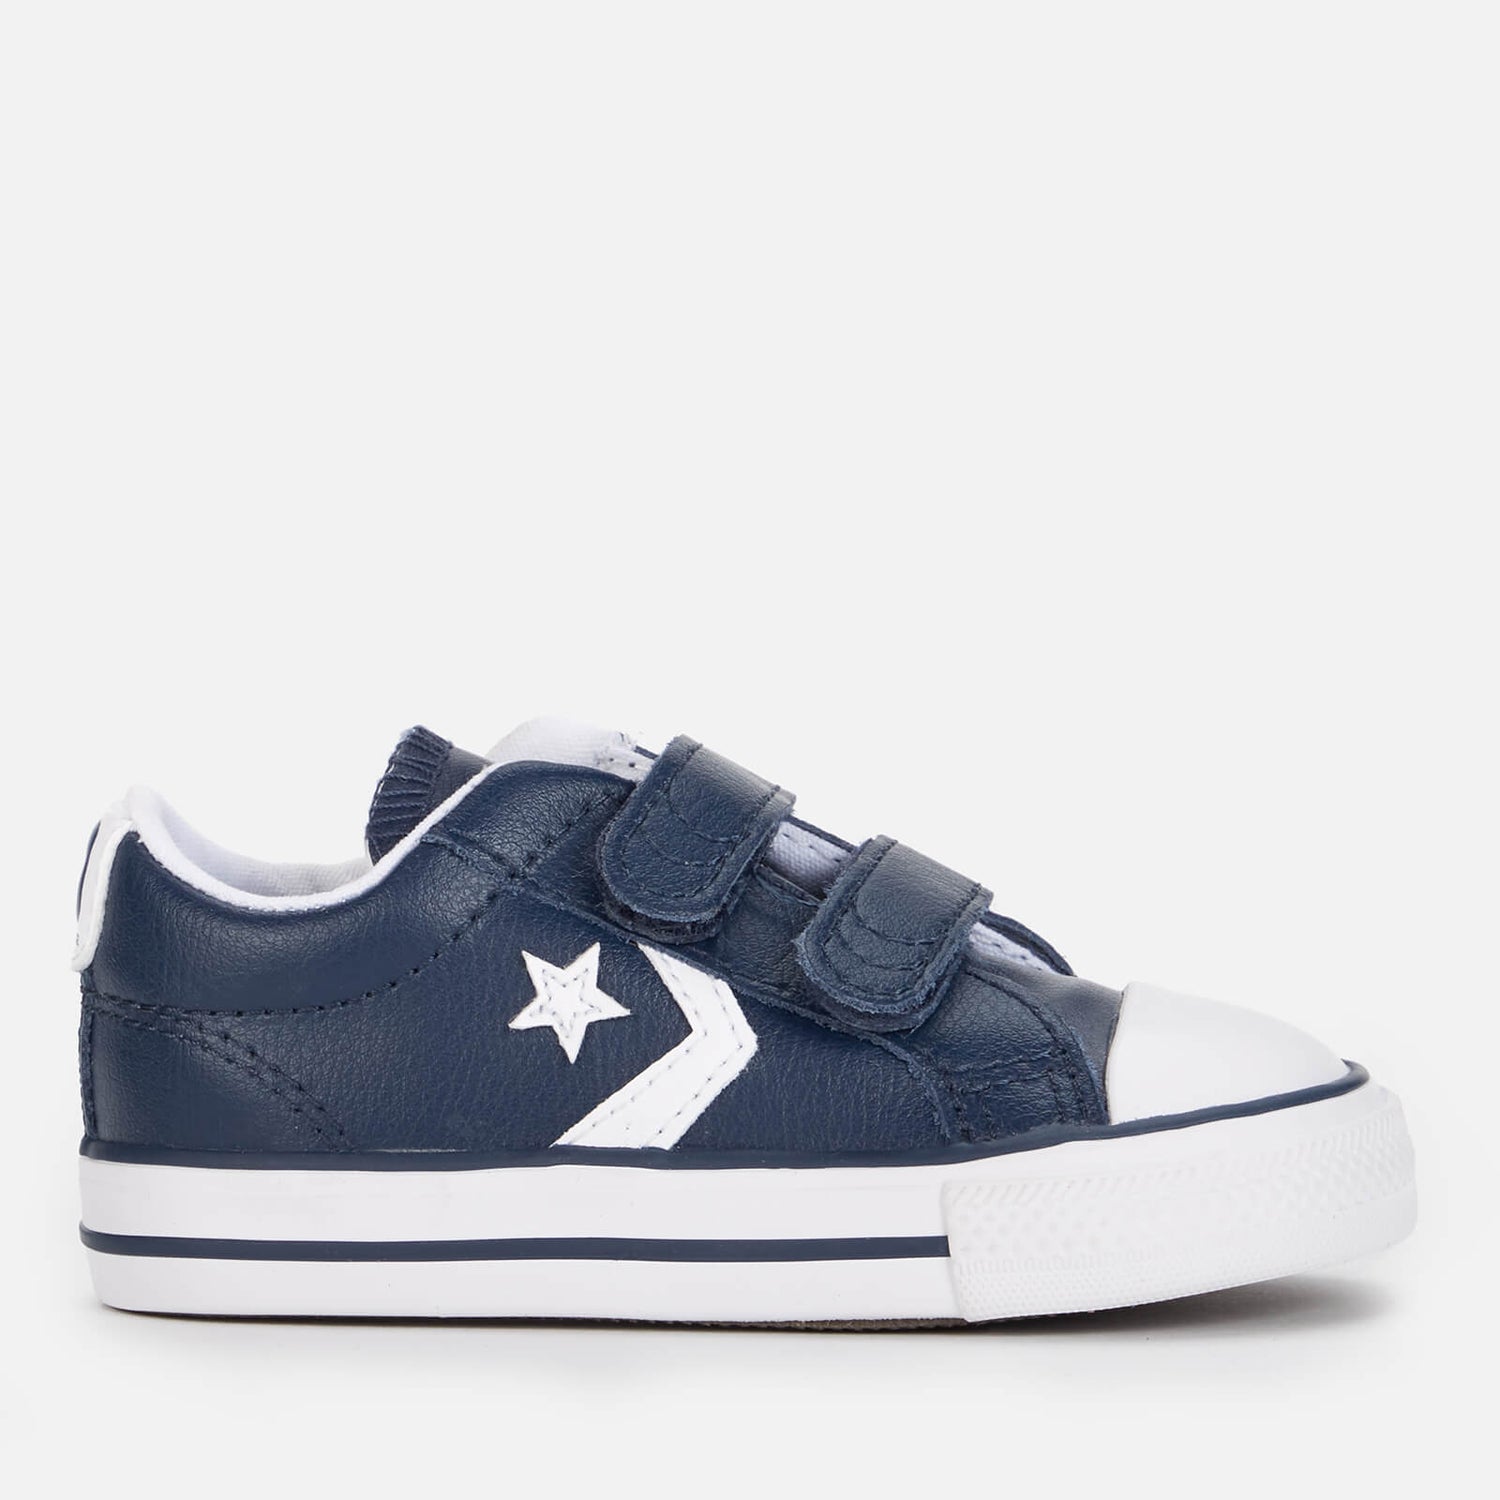 Converse Toddlers' Star Player V2 Trainer - Navy/White - UK 4 Baby